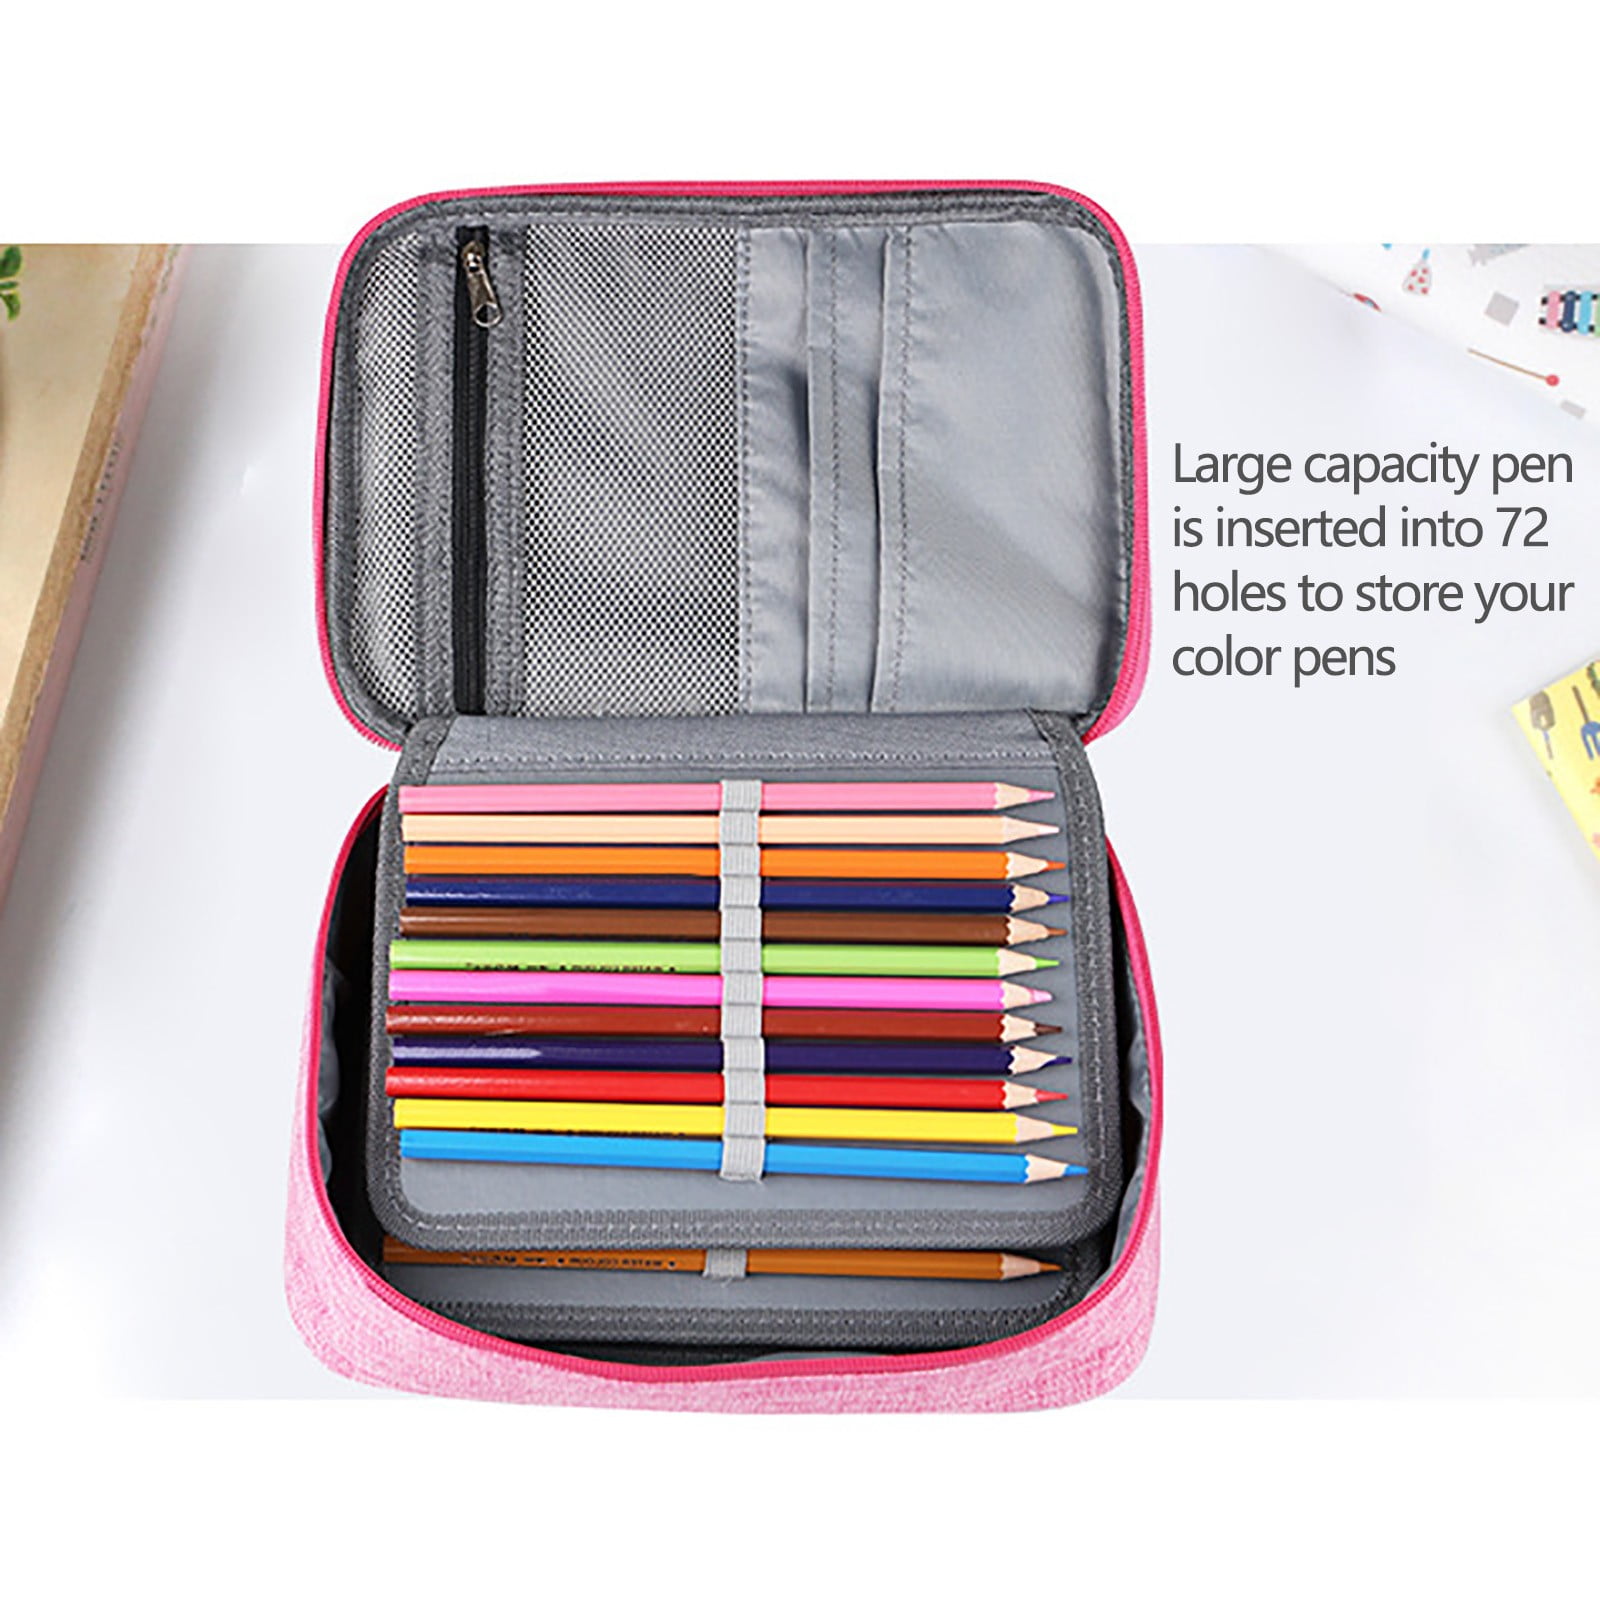  YOUSHARES Big Capacity Colored Pencil Case - 480 Slots large  Pen Case Organizer with Multilayer Holder for Prismacolor Colored Pencils &  Gel Pen (Quicksand Gold) : Office Products